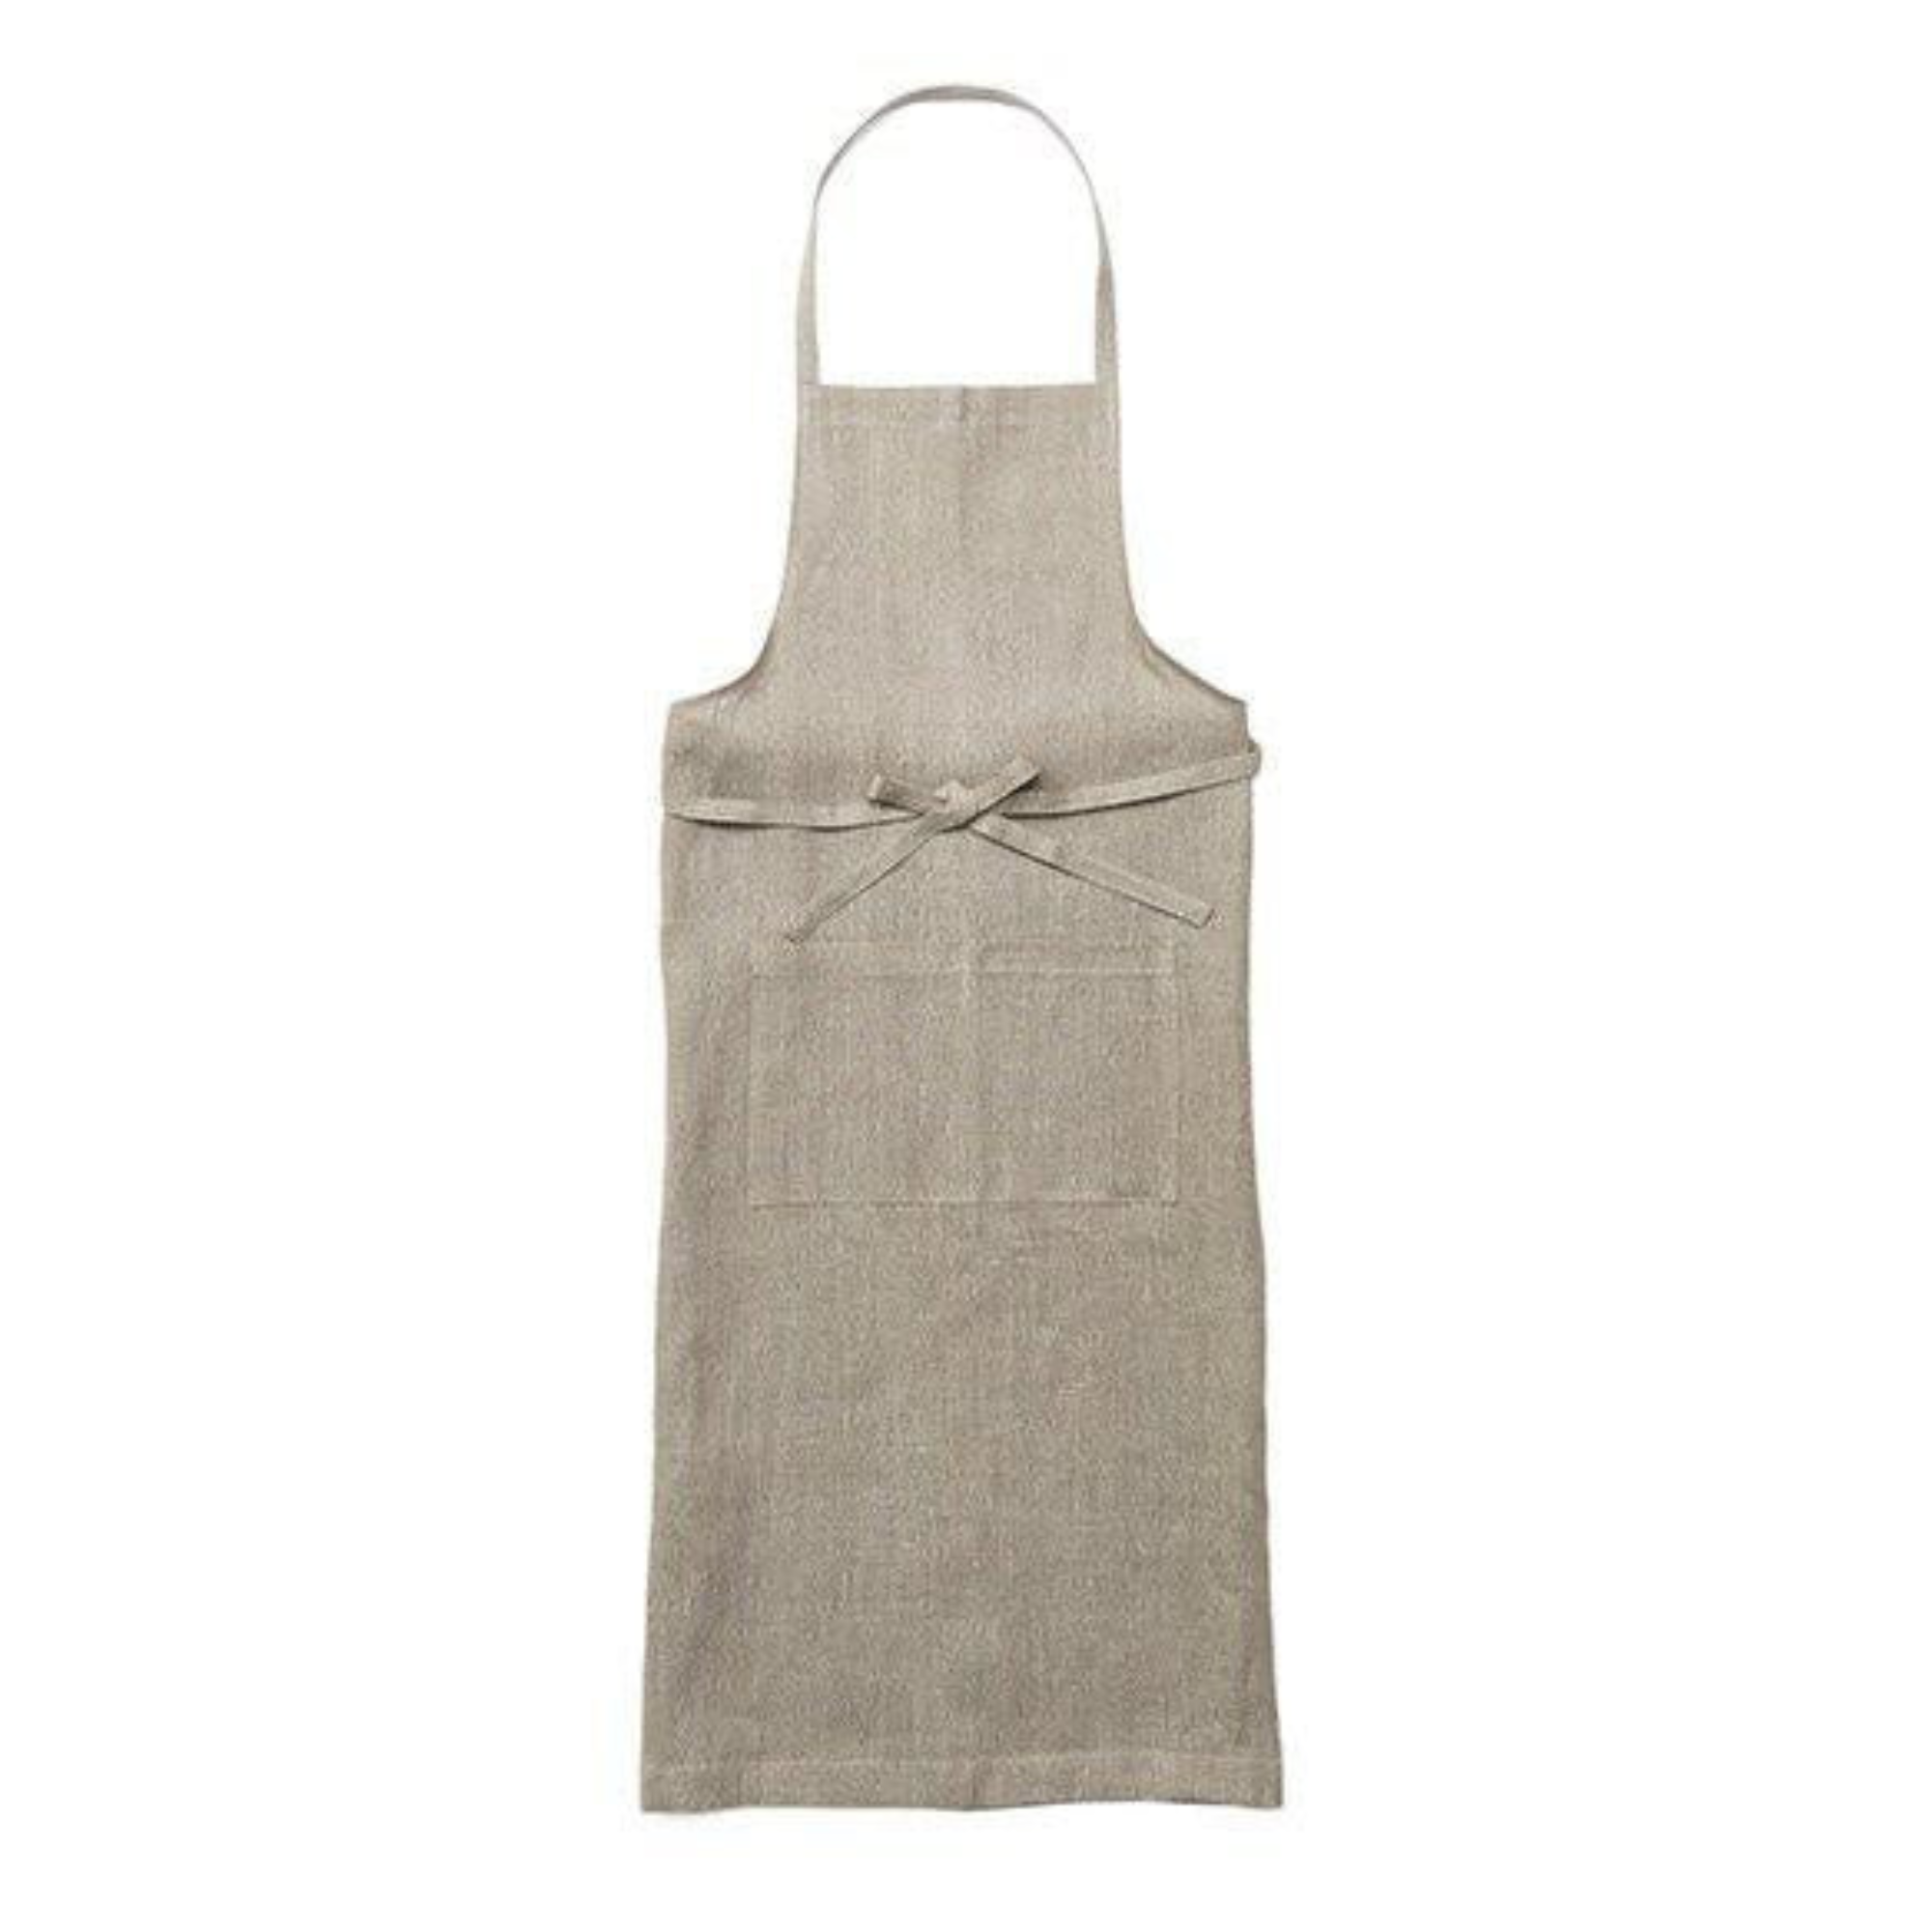 A natural-colored linen apron with two front pockets, made of durable fabric, features a simple yet stylish design.